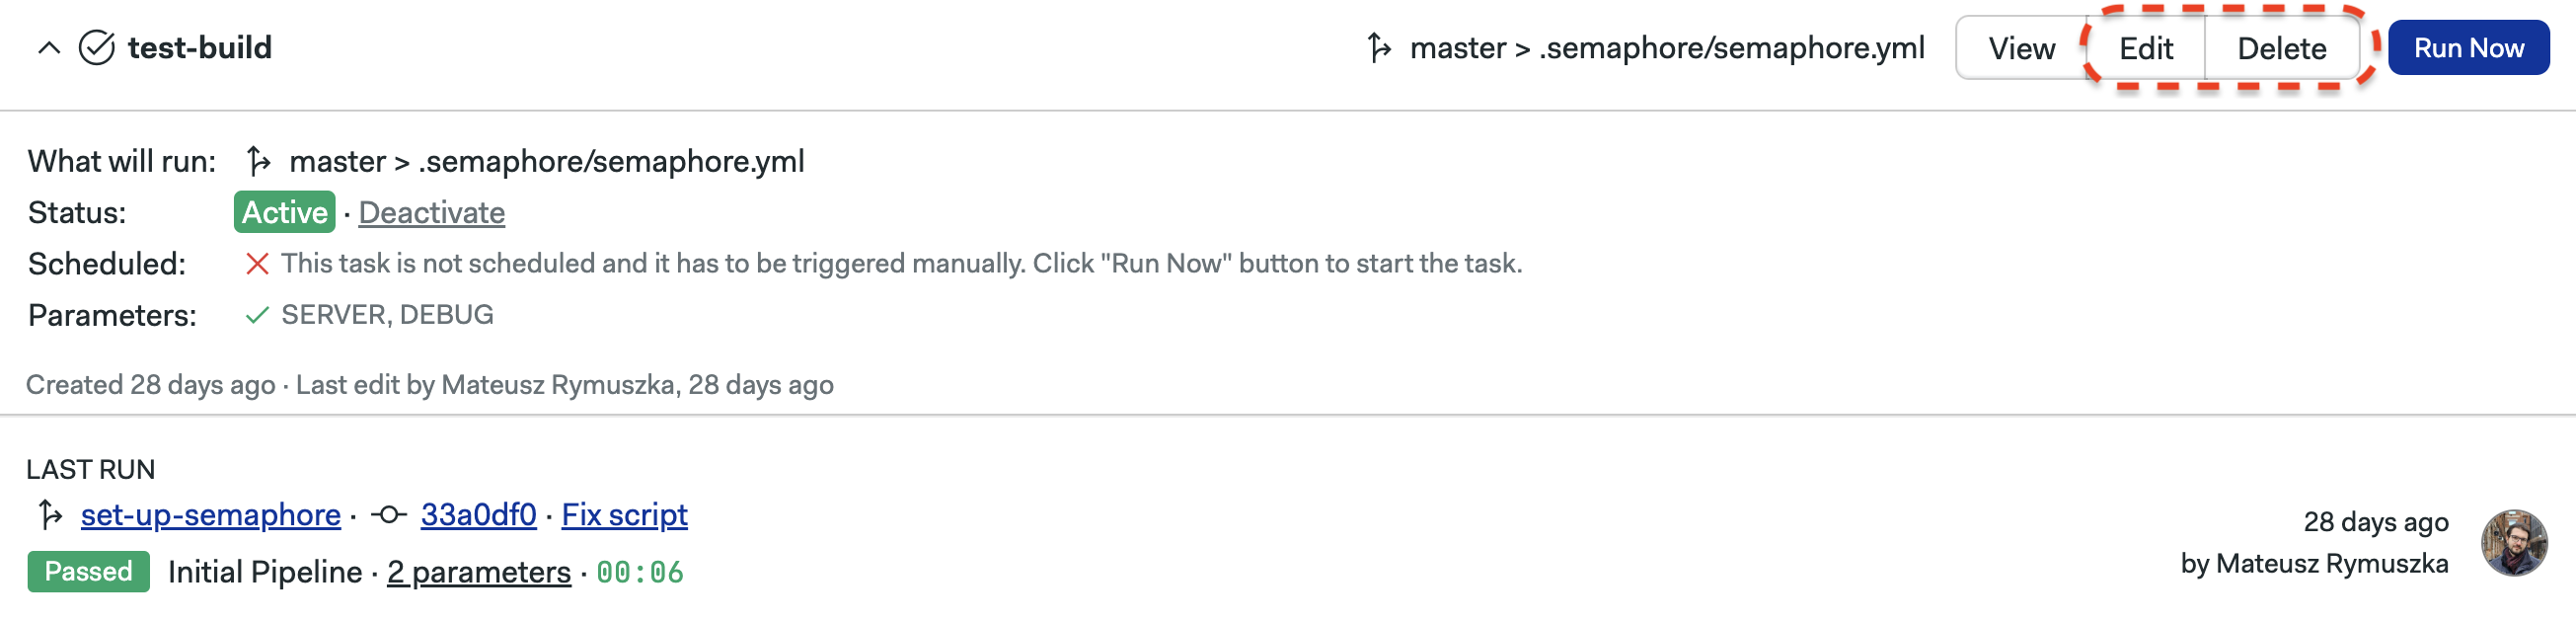 Edit and Delete buttons in the project tasks page